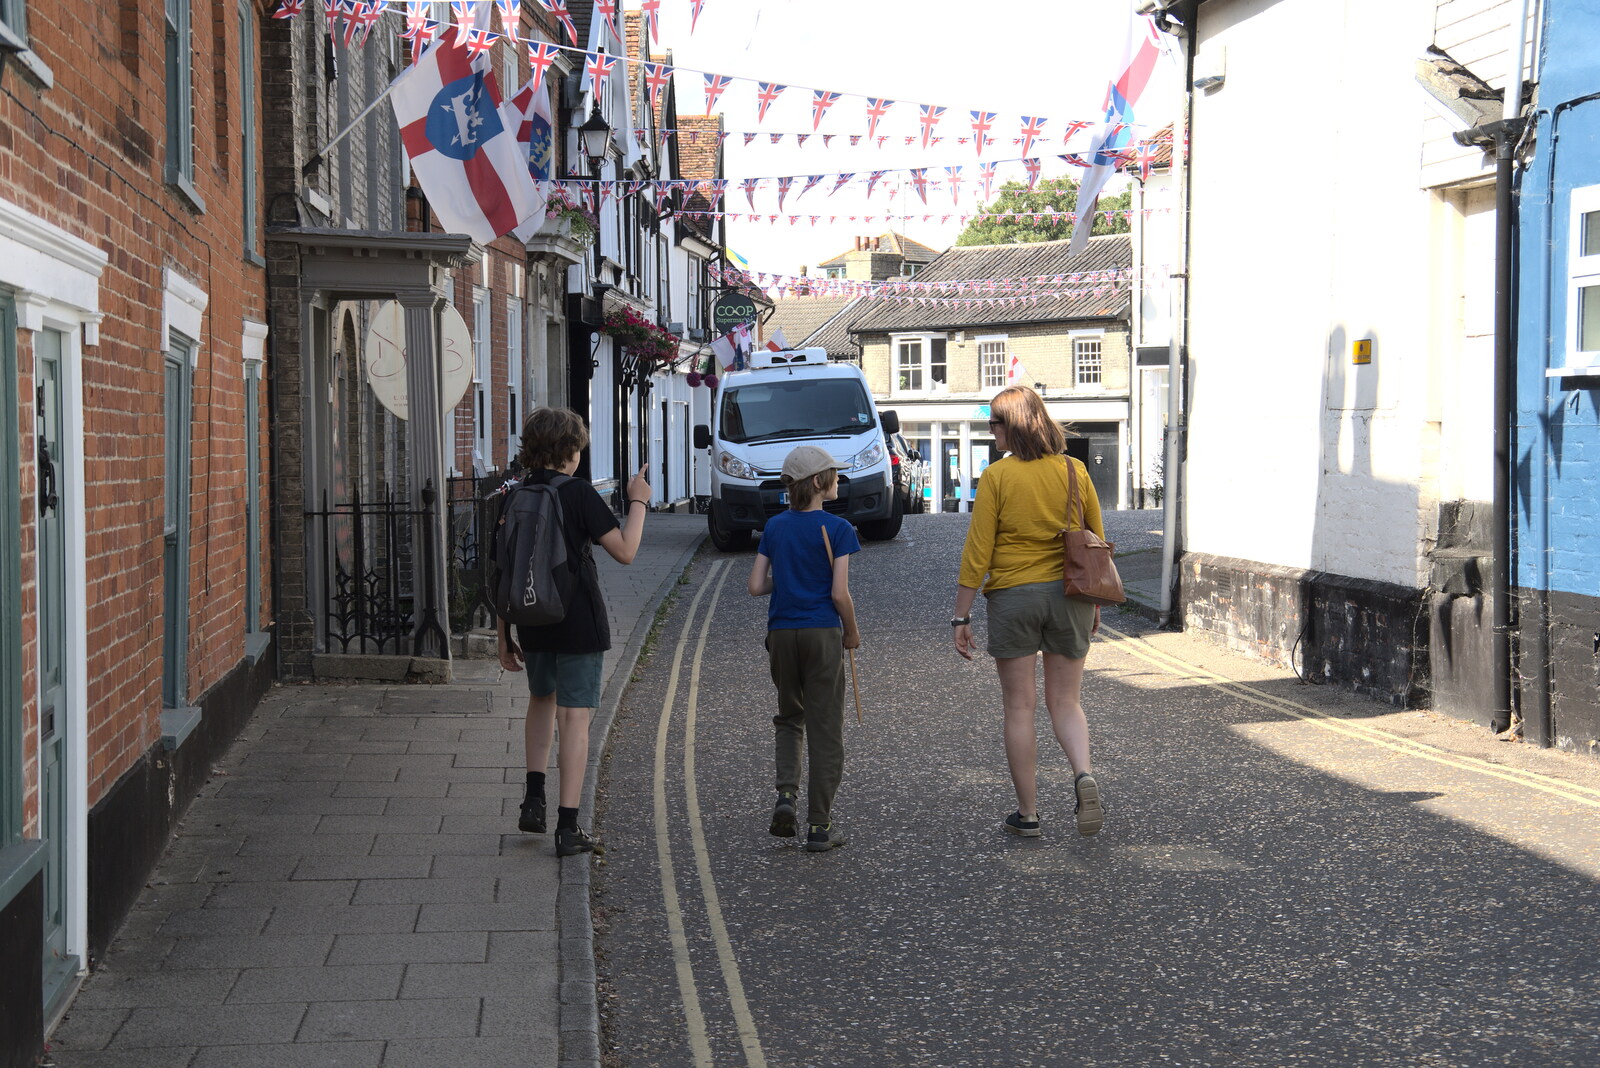 A Trip to Framlingham, Suffolk - 28th July 2022: We roam around the market square